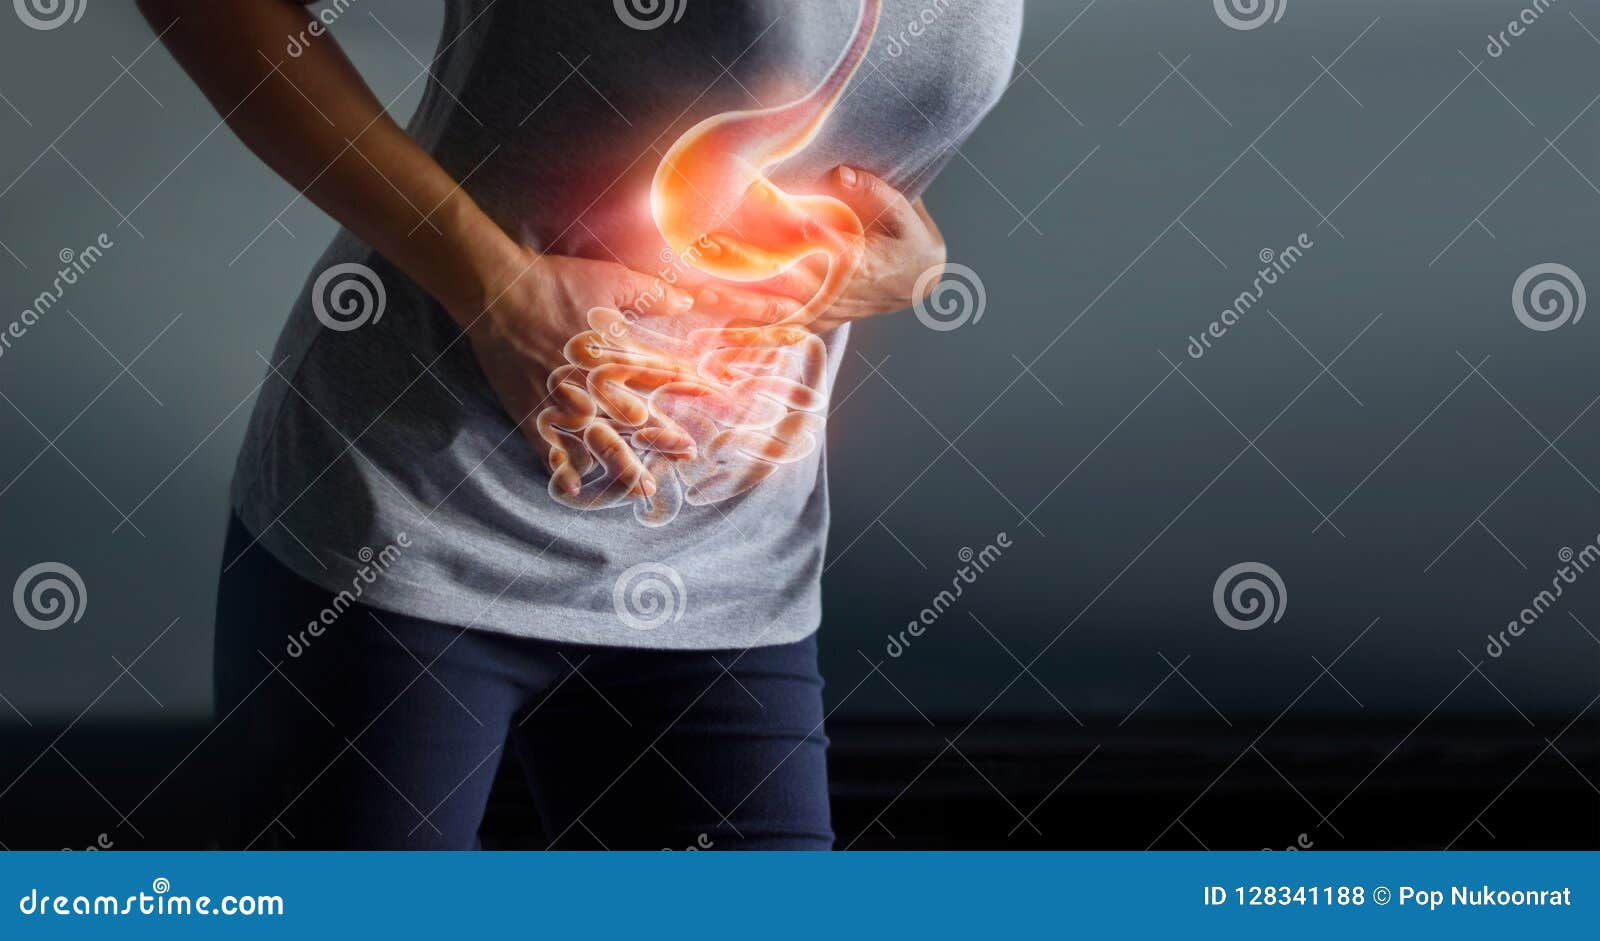 woman touching stomach painful from stomachach.